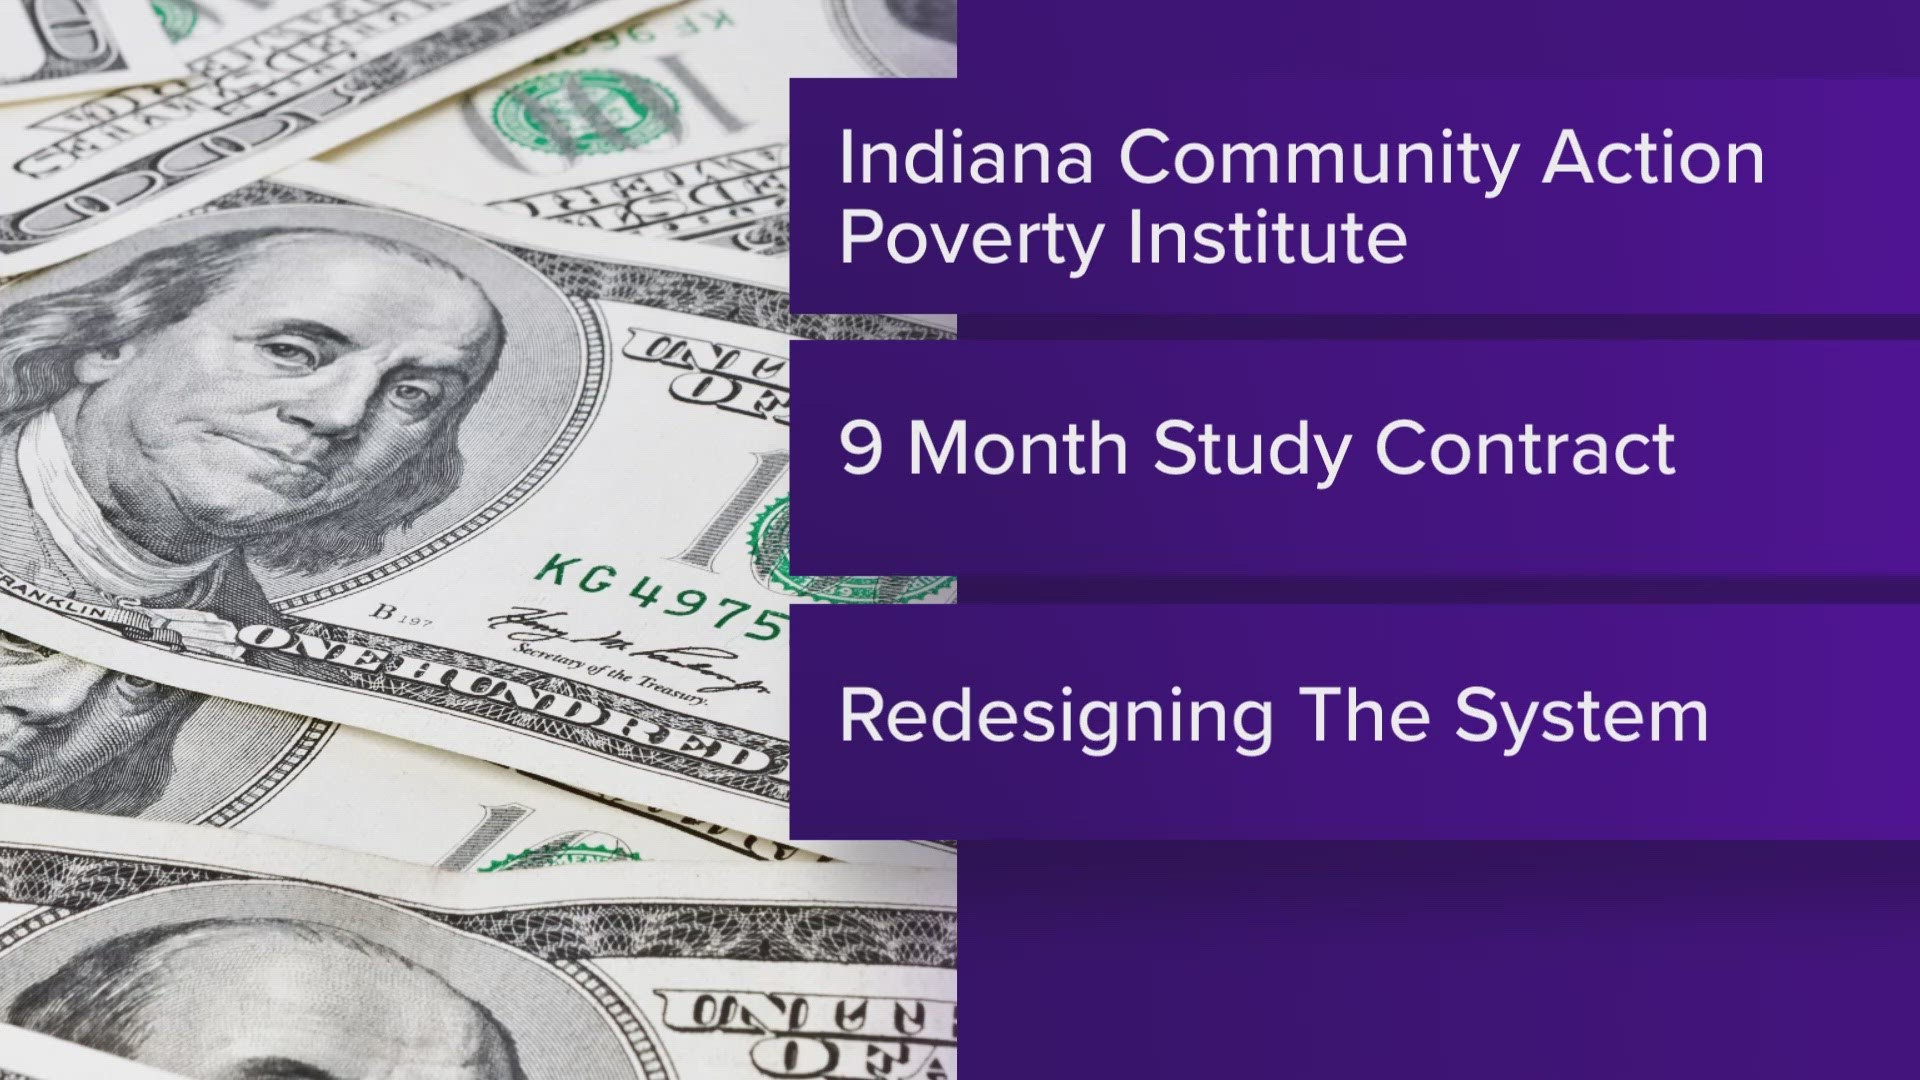 The Indiana Community Action Poverty Institute or "INCAP" is studying how to make the programs work better together.